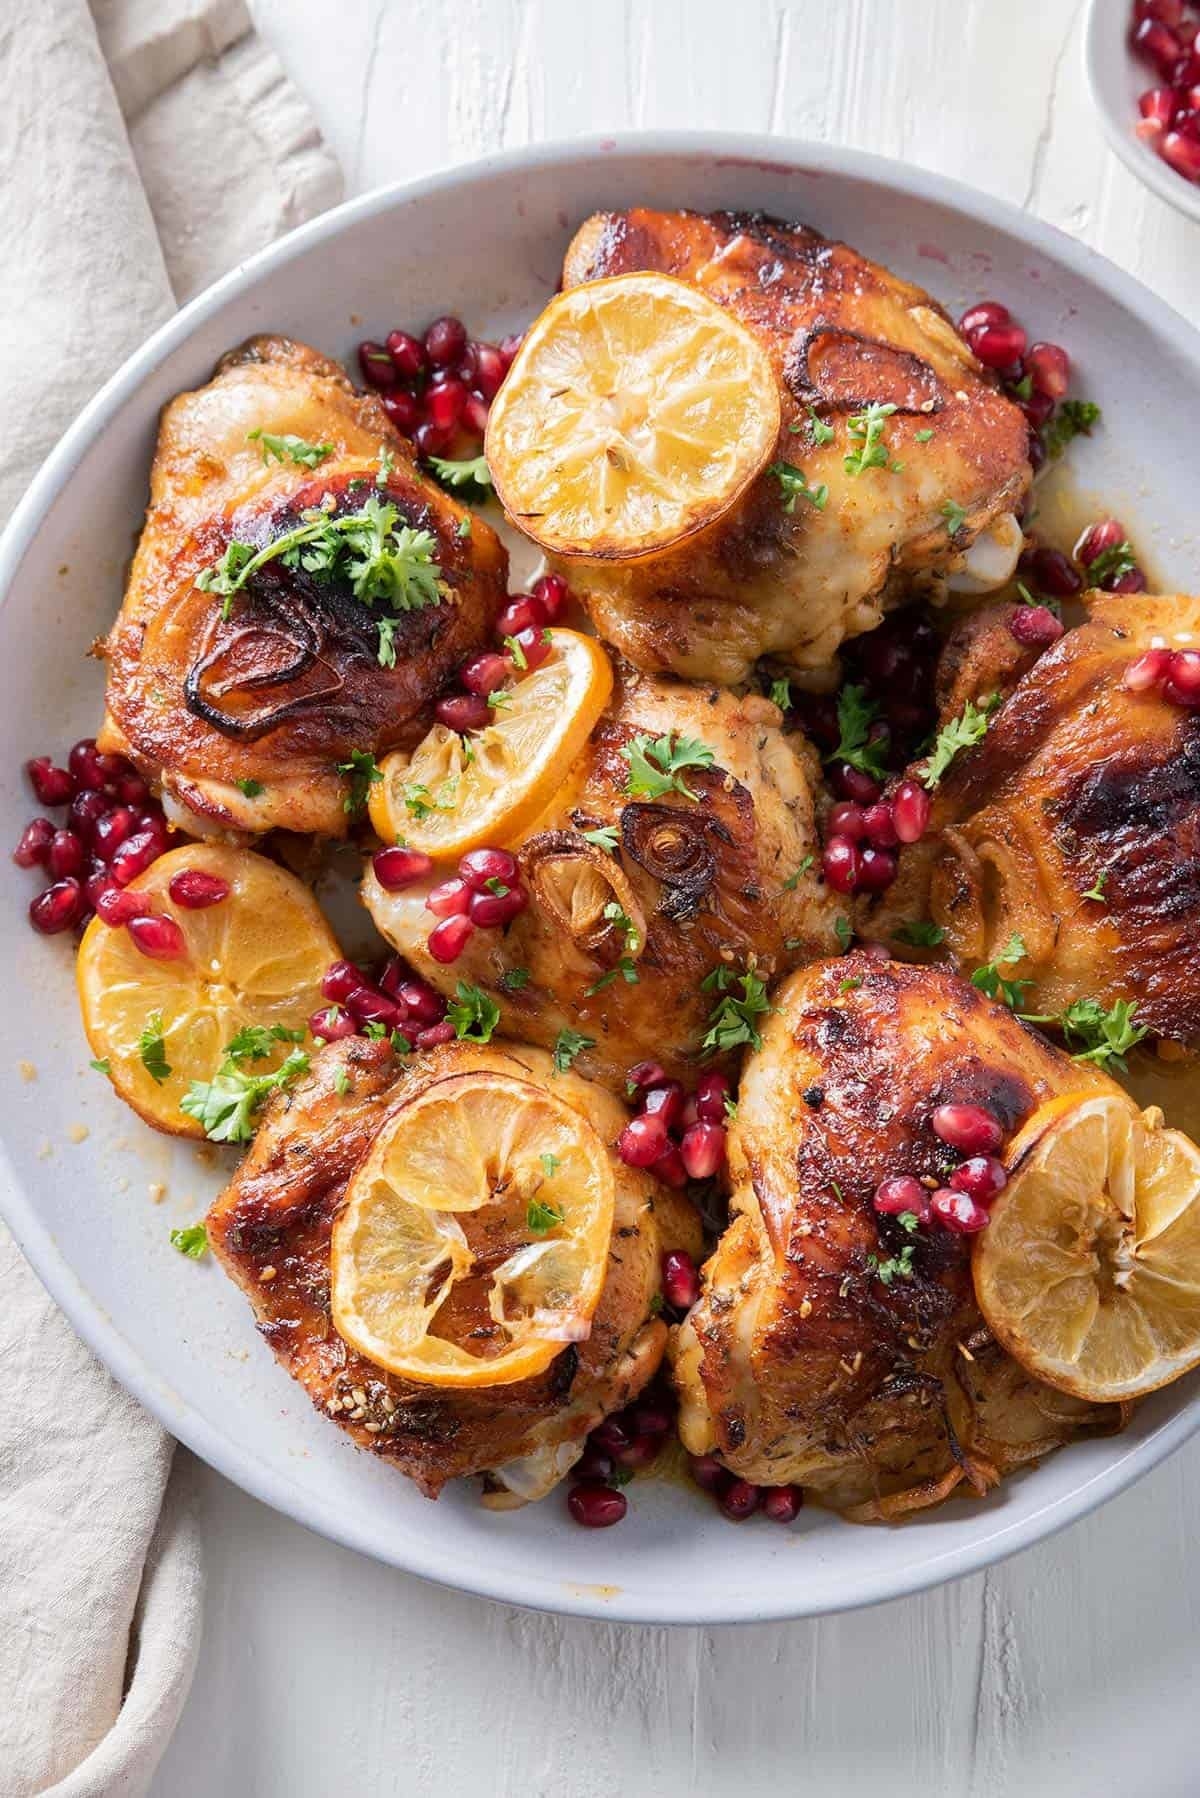 Pomegranate chicken thighs with lemon.